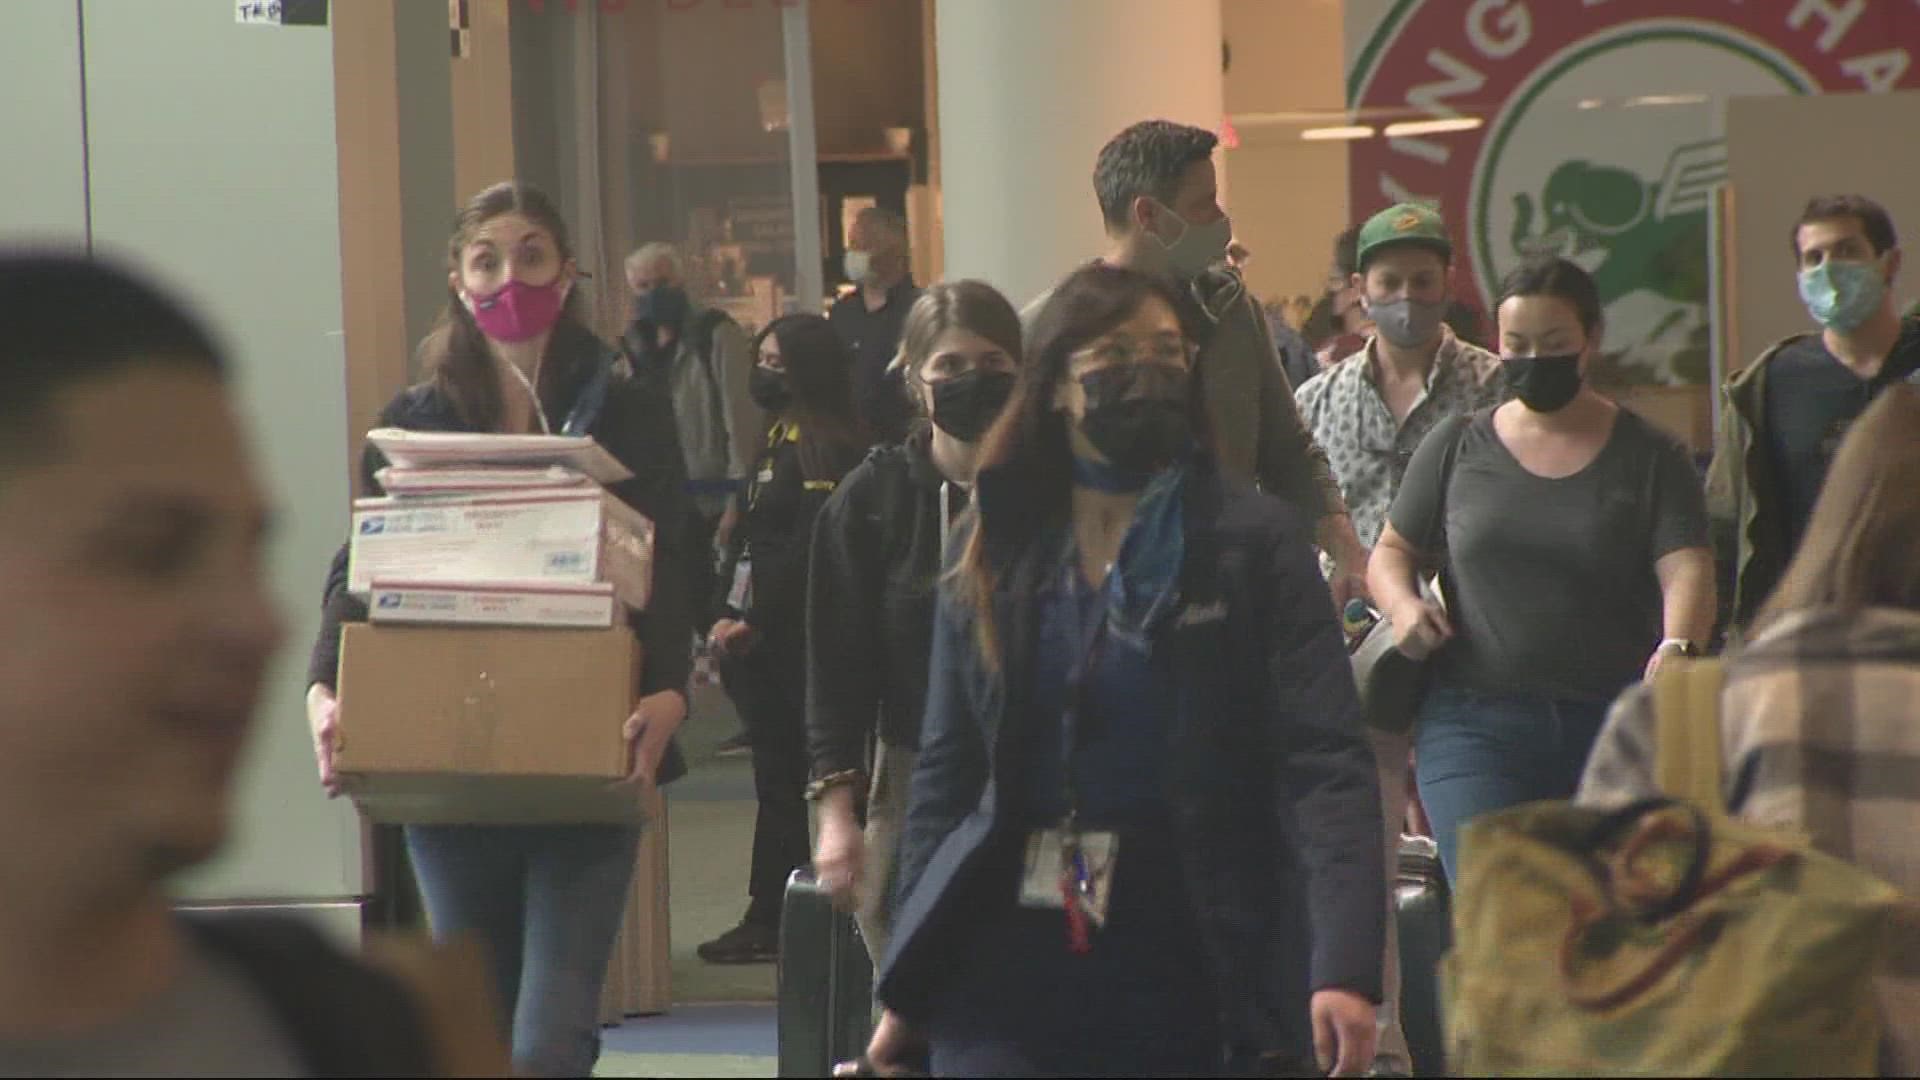 Portland International Airport will no longer be enforcing a federal mask requirement after a ruling in Florida that struck down the Biden administration rule.